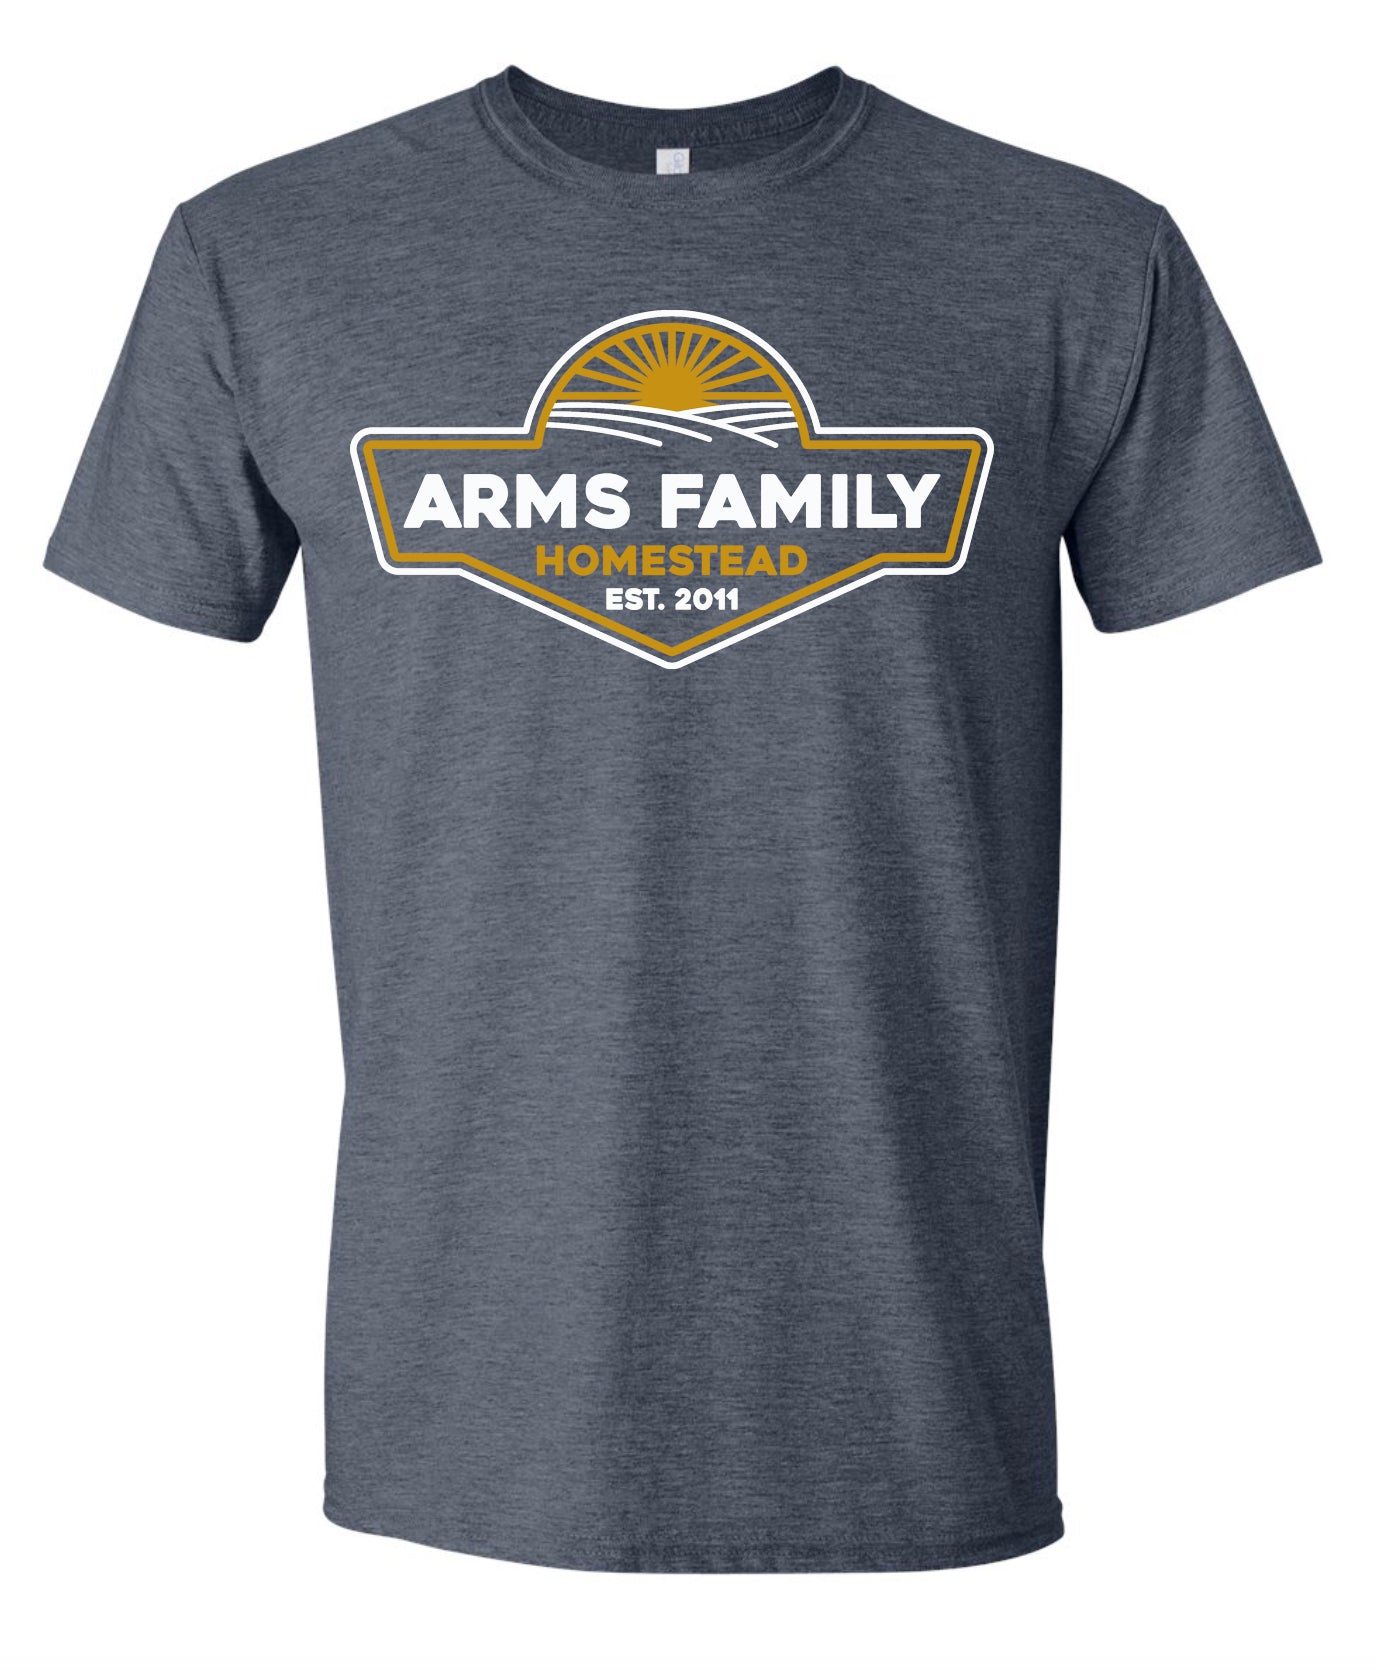 YOUTH ARMS FAMILY HOMESTEAD T-SHIRT